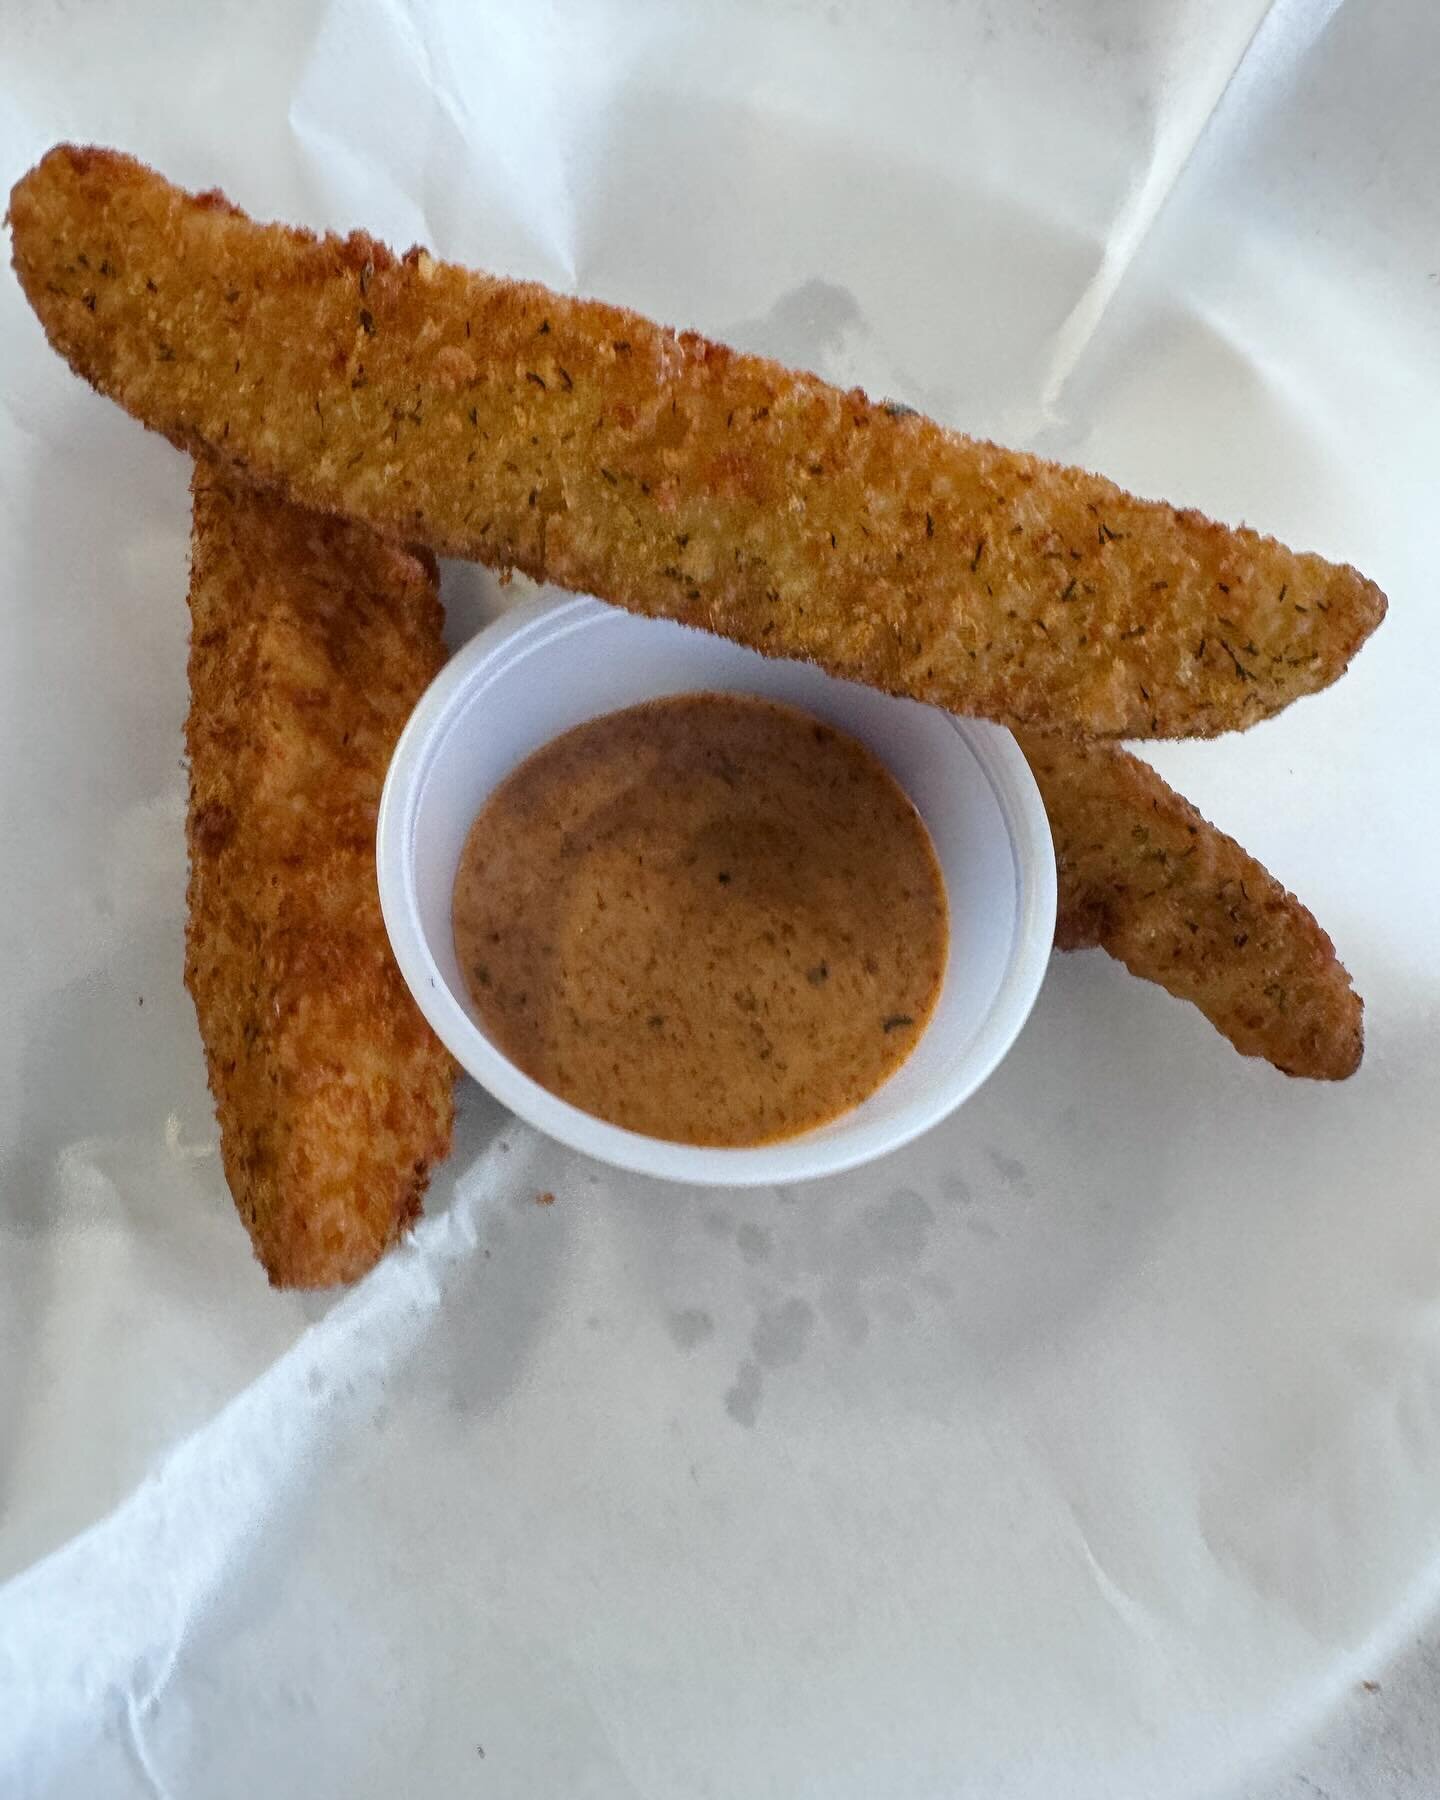 Fried pickle spears no available at squires corner kitchen ! I love these things !!!